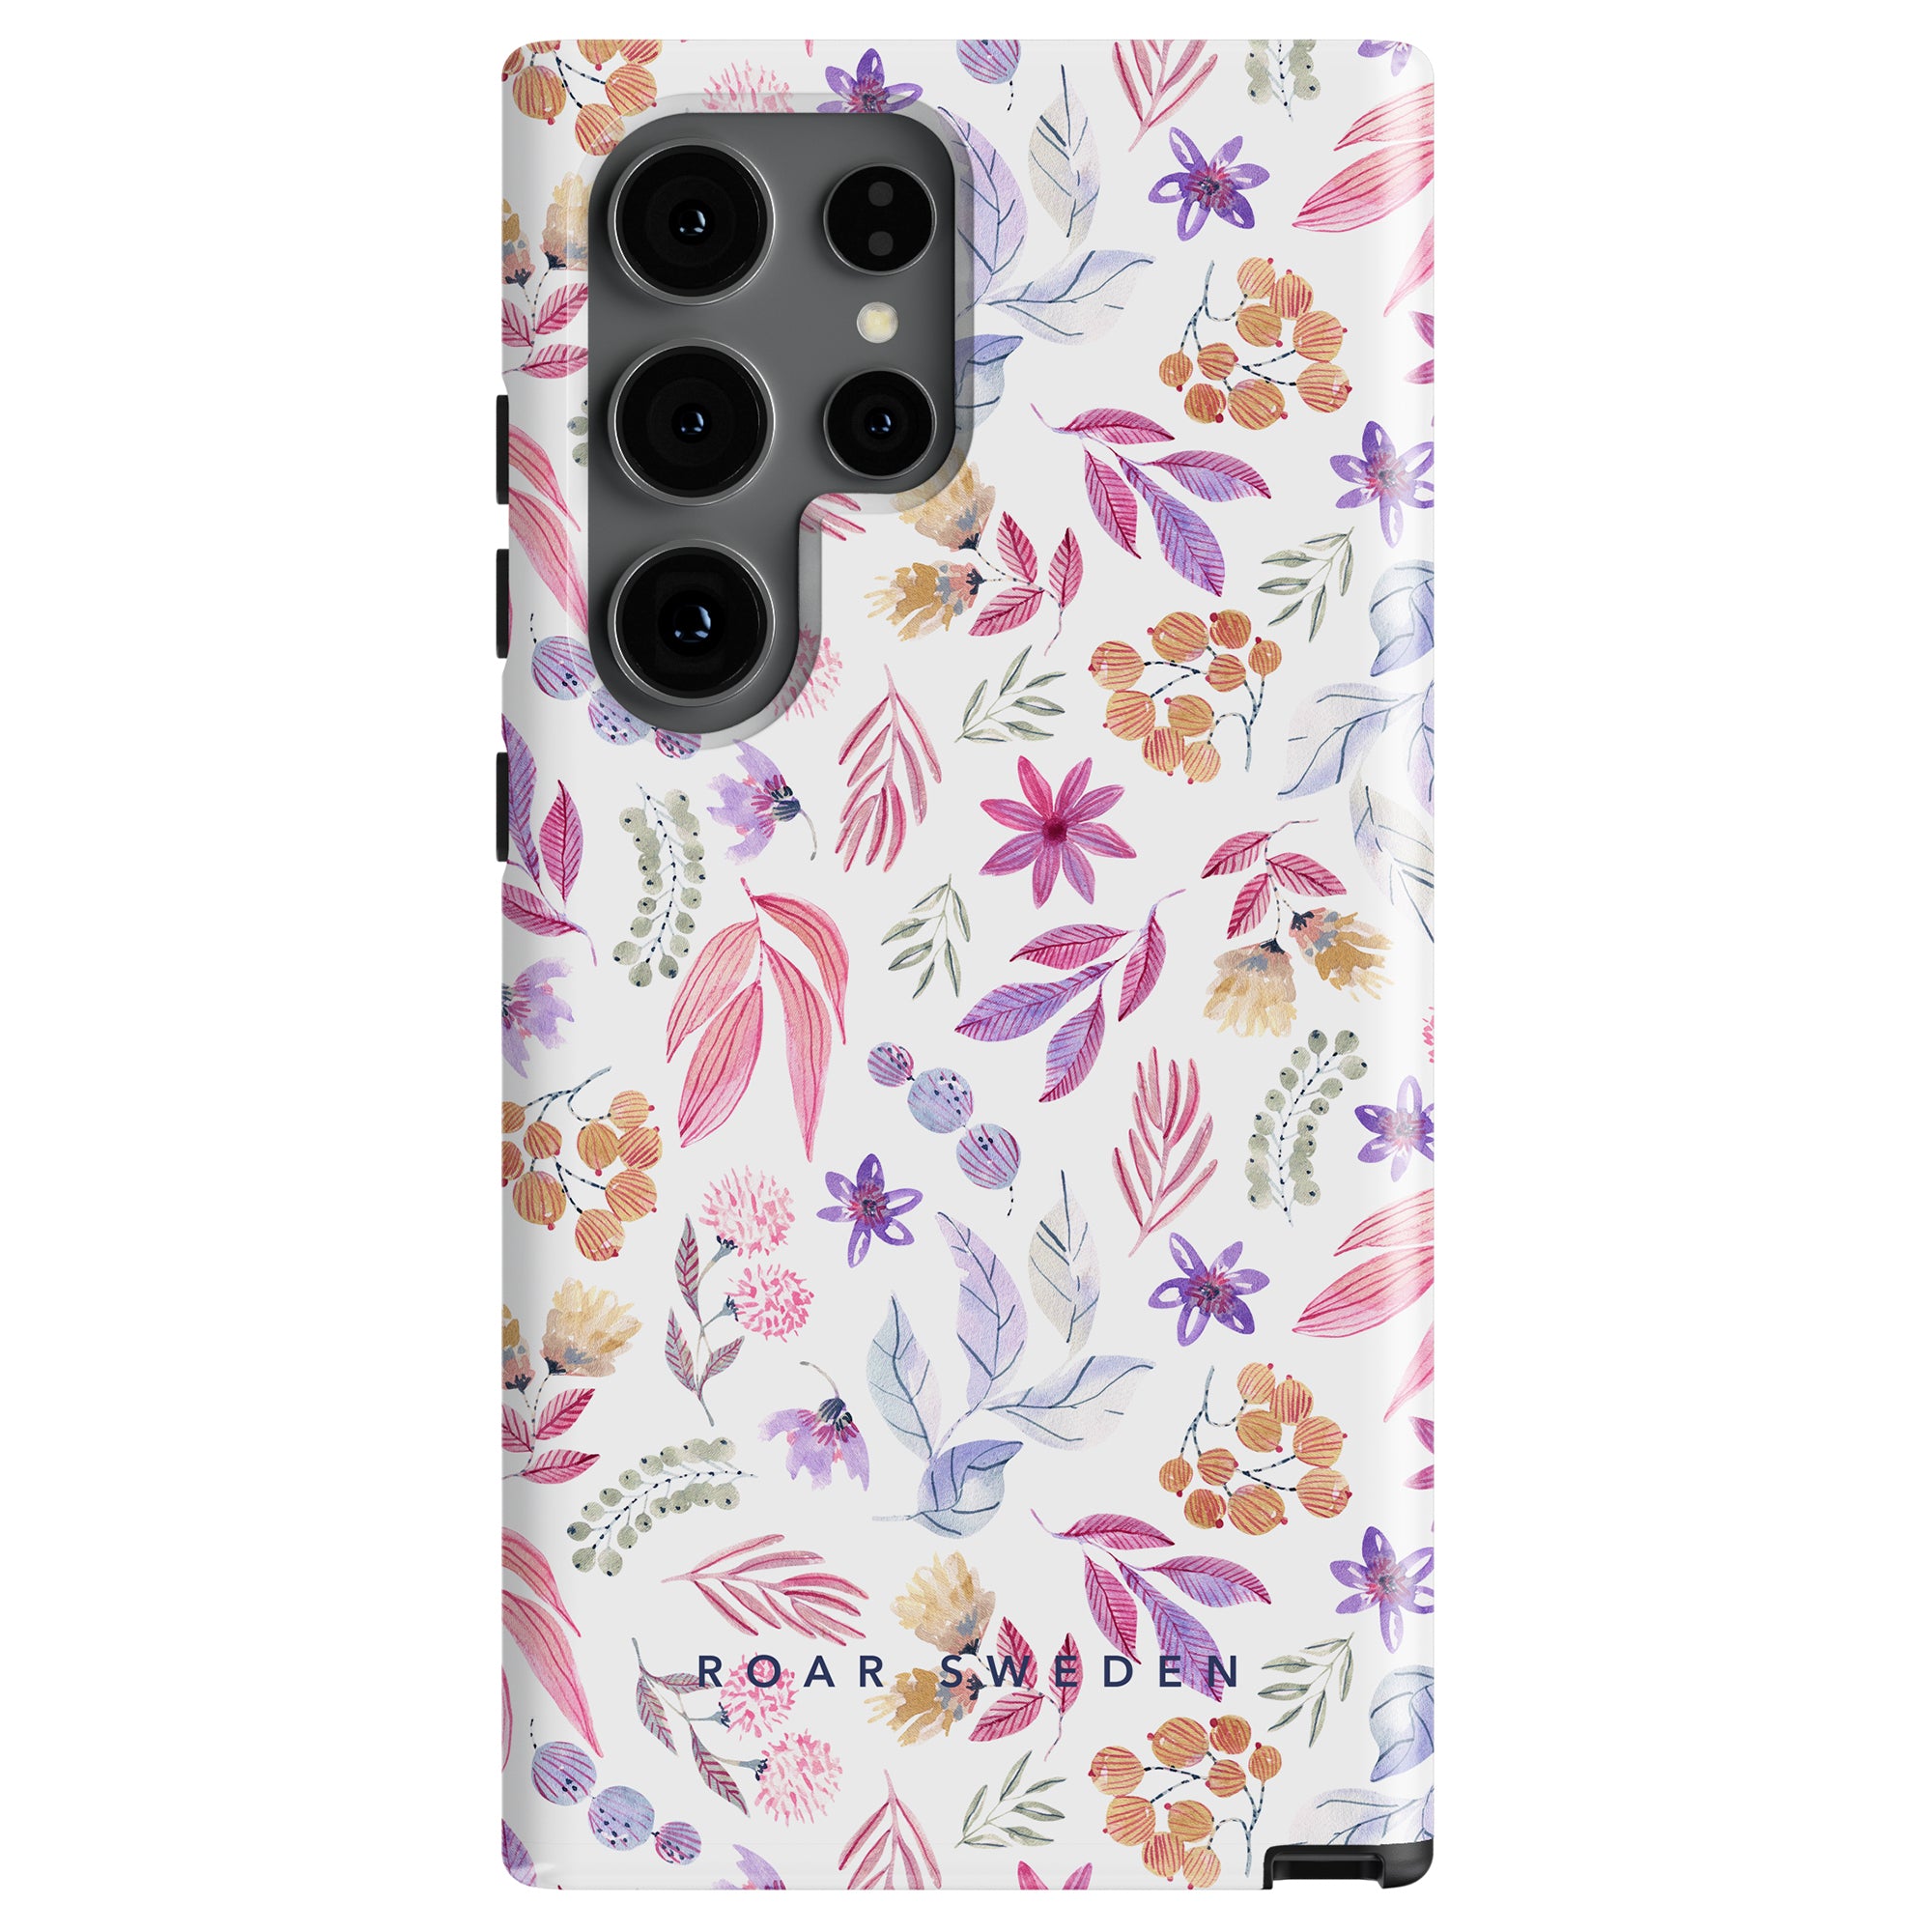 A smartphone with a floral patterned case featuring various colorful flowers and leaves. The bottom of the case is inscribed with "ROAR SWEDEN." Part of the Floral Collection, this Flower Power - Tough Case offers maximal skydd for your device.